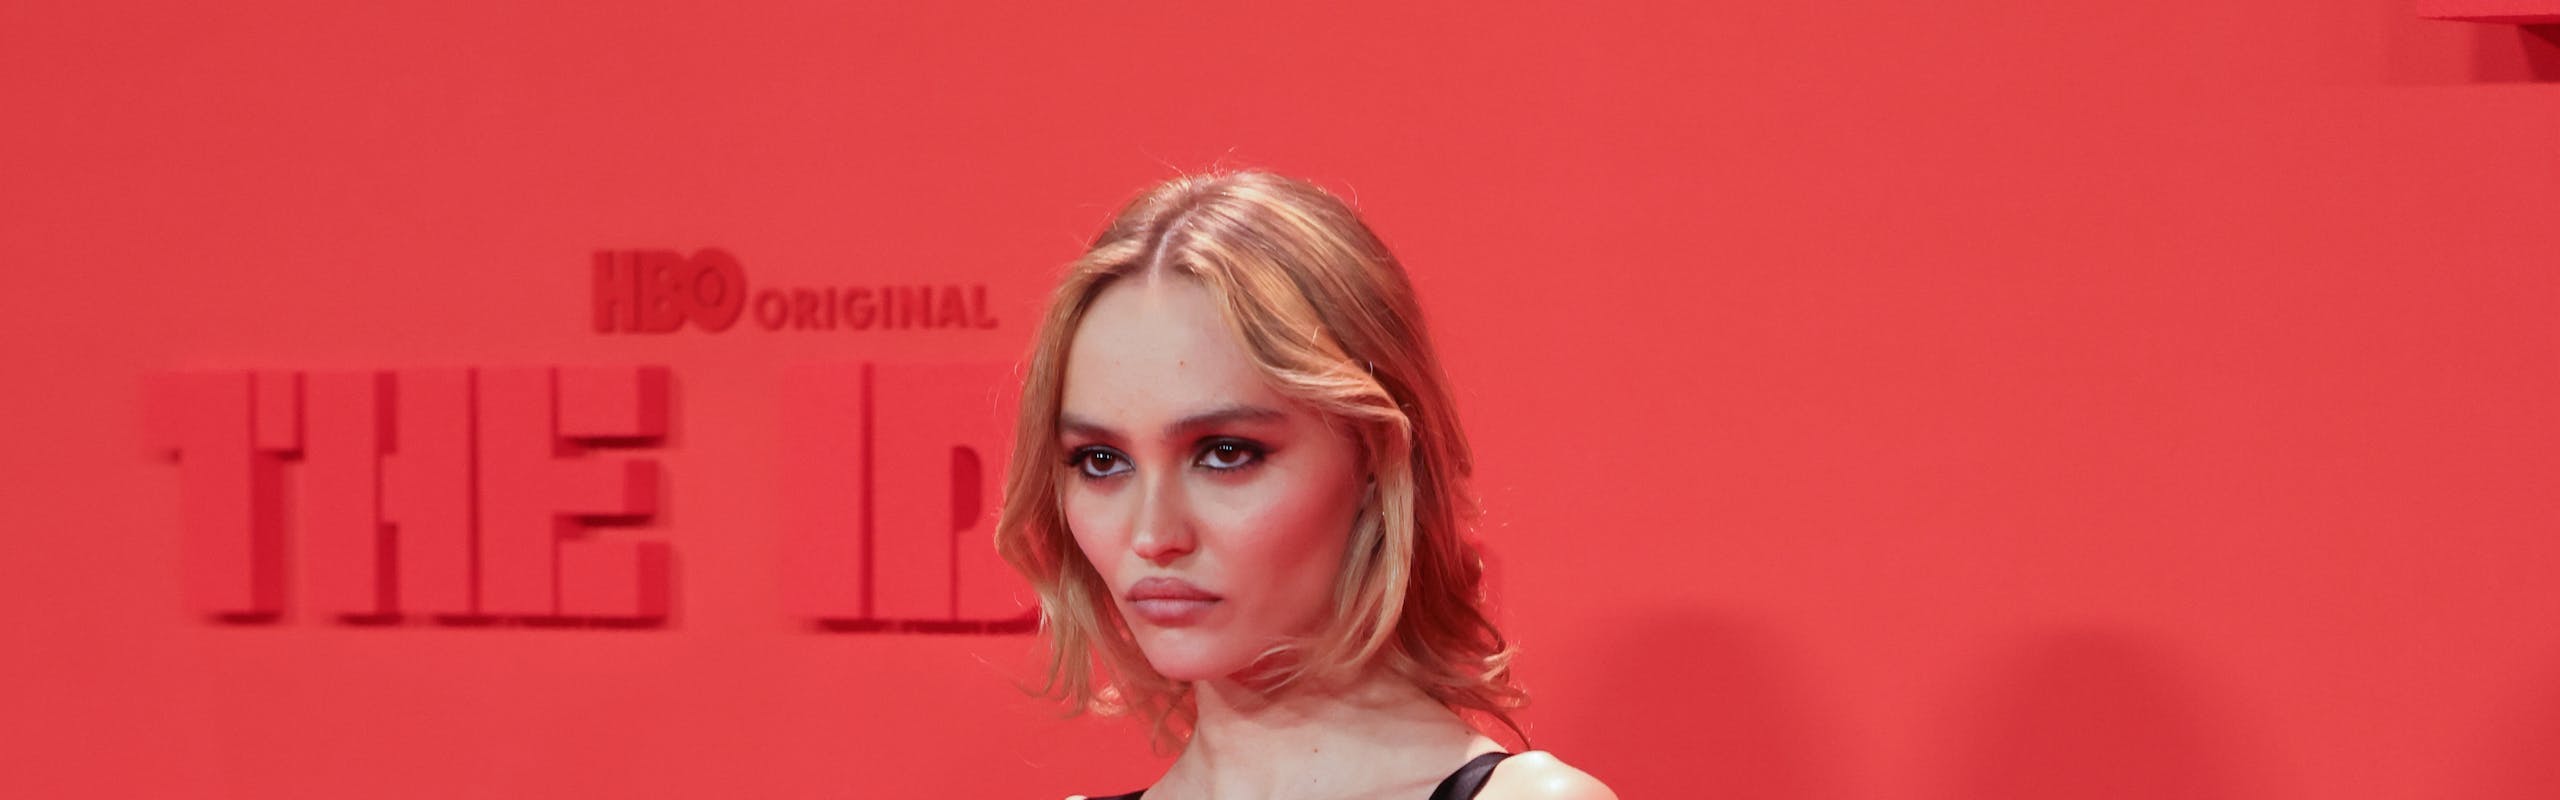 Lily-Rose Depp, CHANEL nuotr.